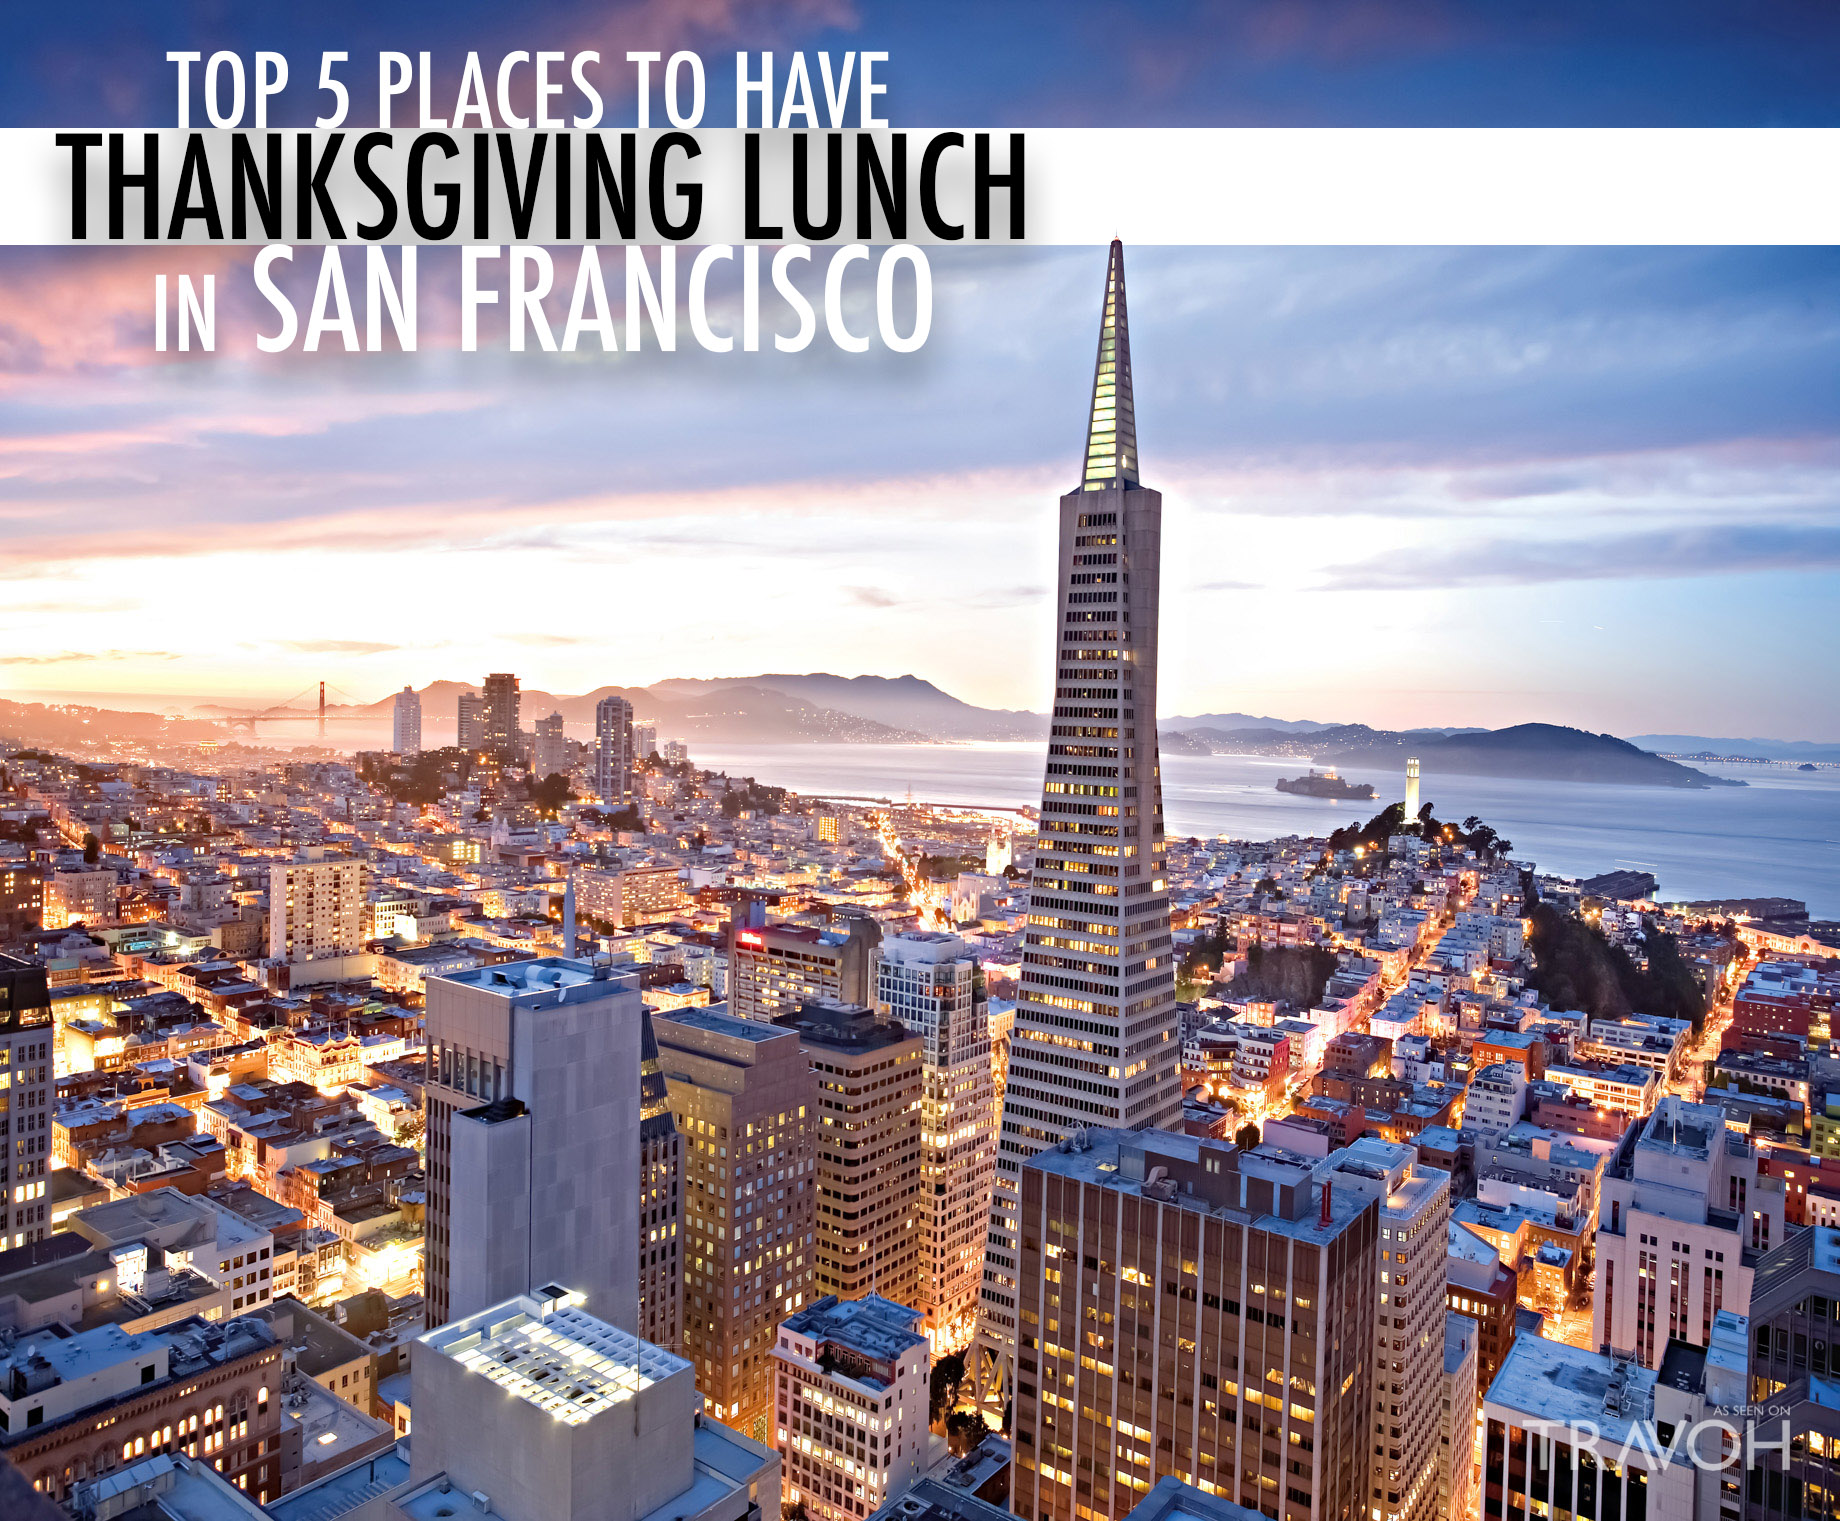 Top 5 Places to Have Thanksgiving Lunch in San Francisco